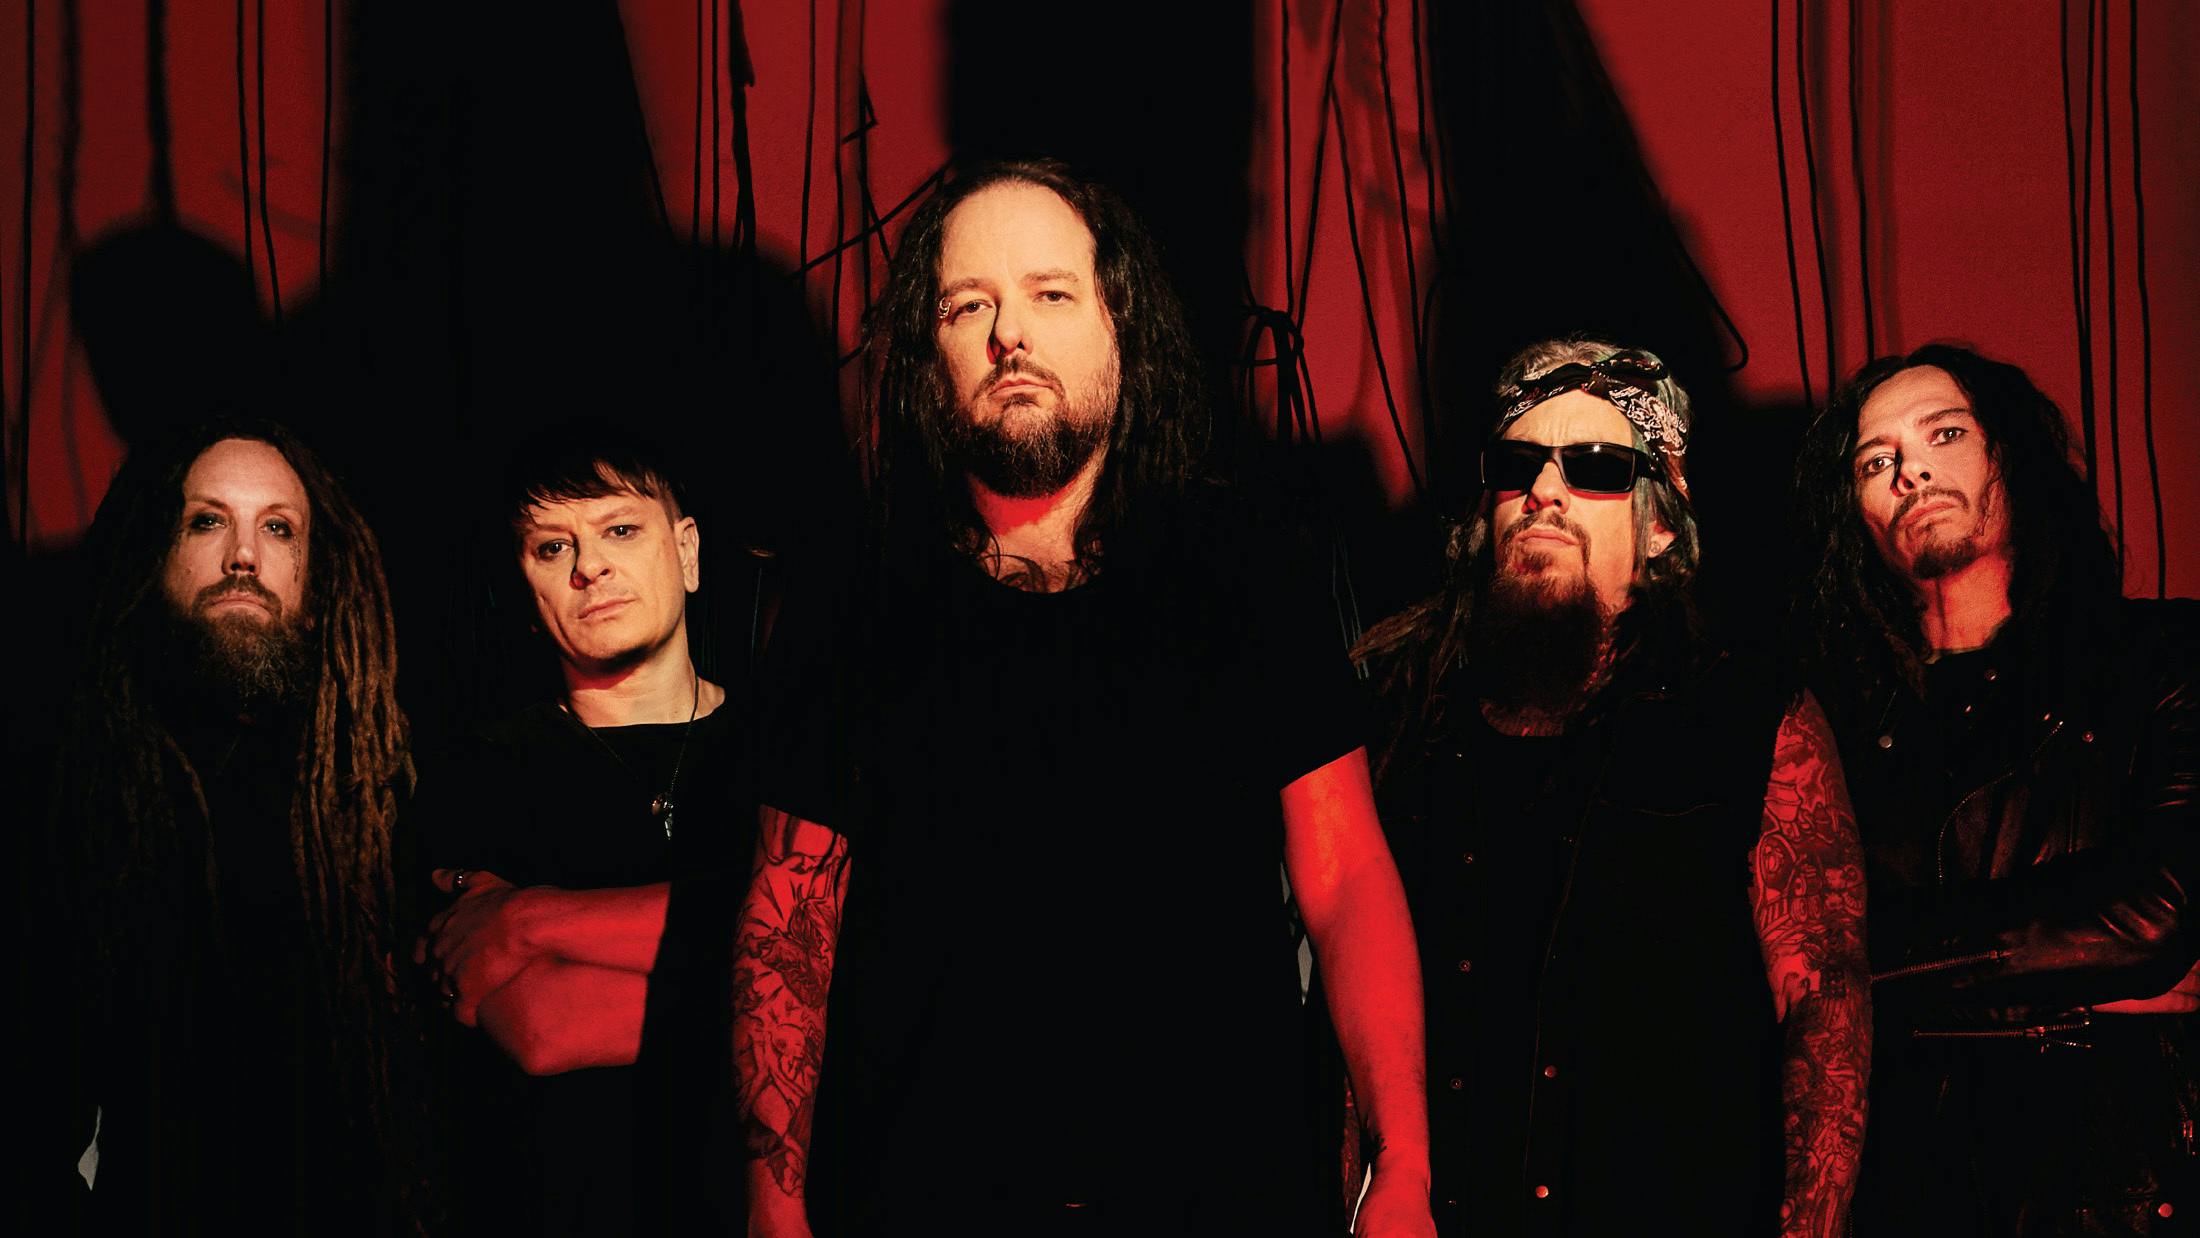 Korn And Gojira Have Announced Some 2020 Shows Together